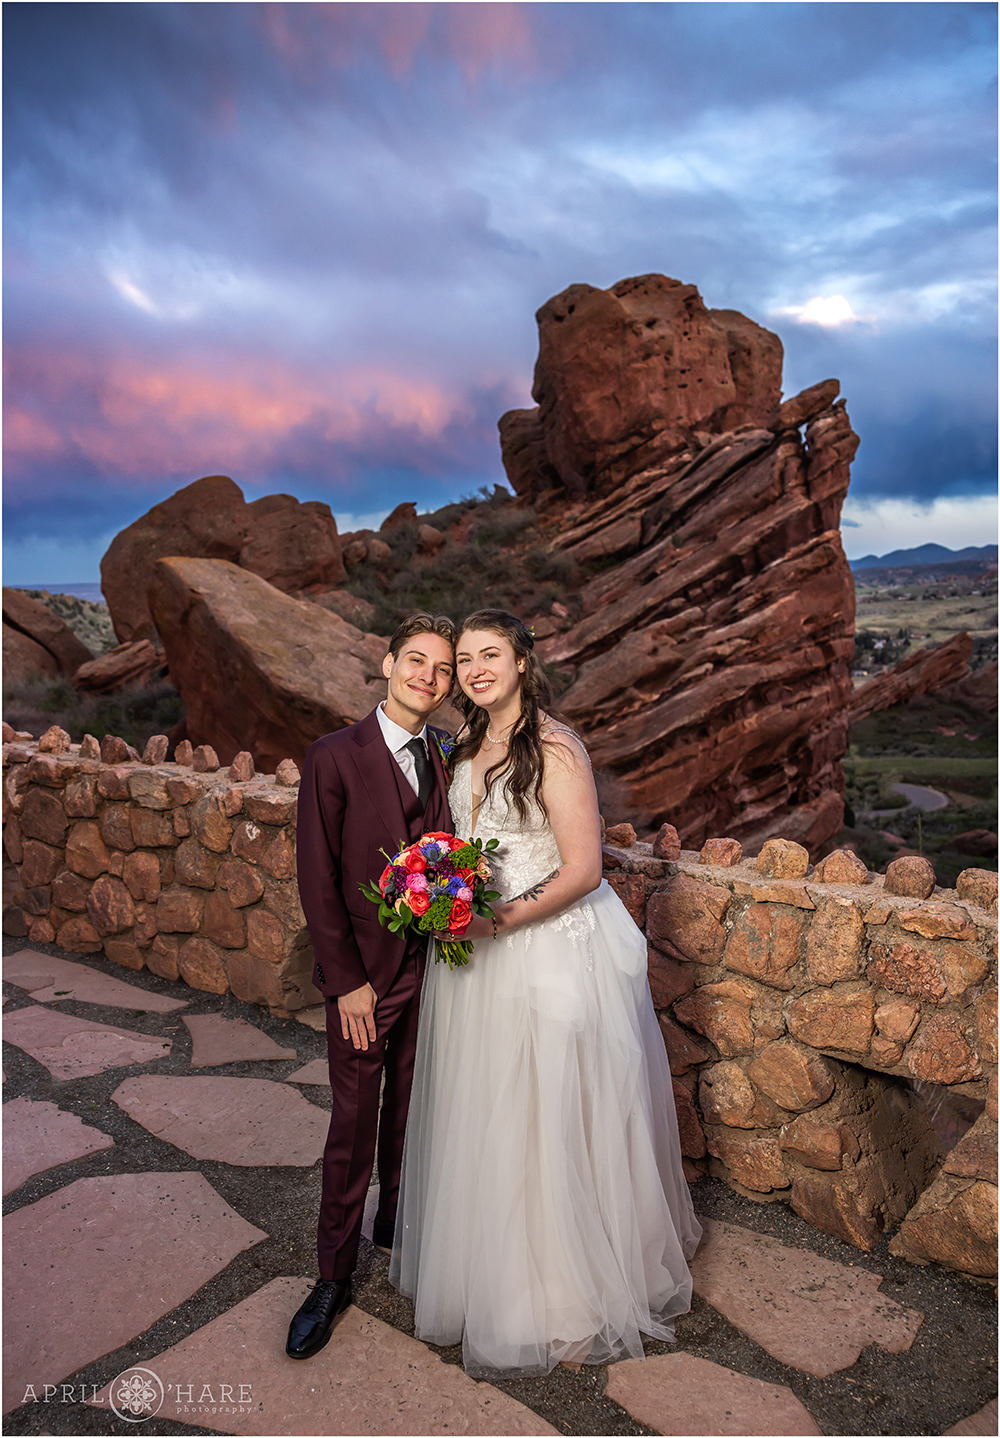 Classic wedding portrait at Sunset at Red Rocks during Spring